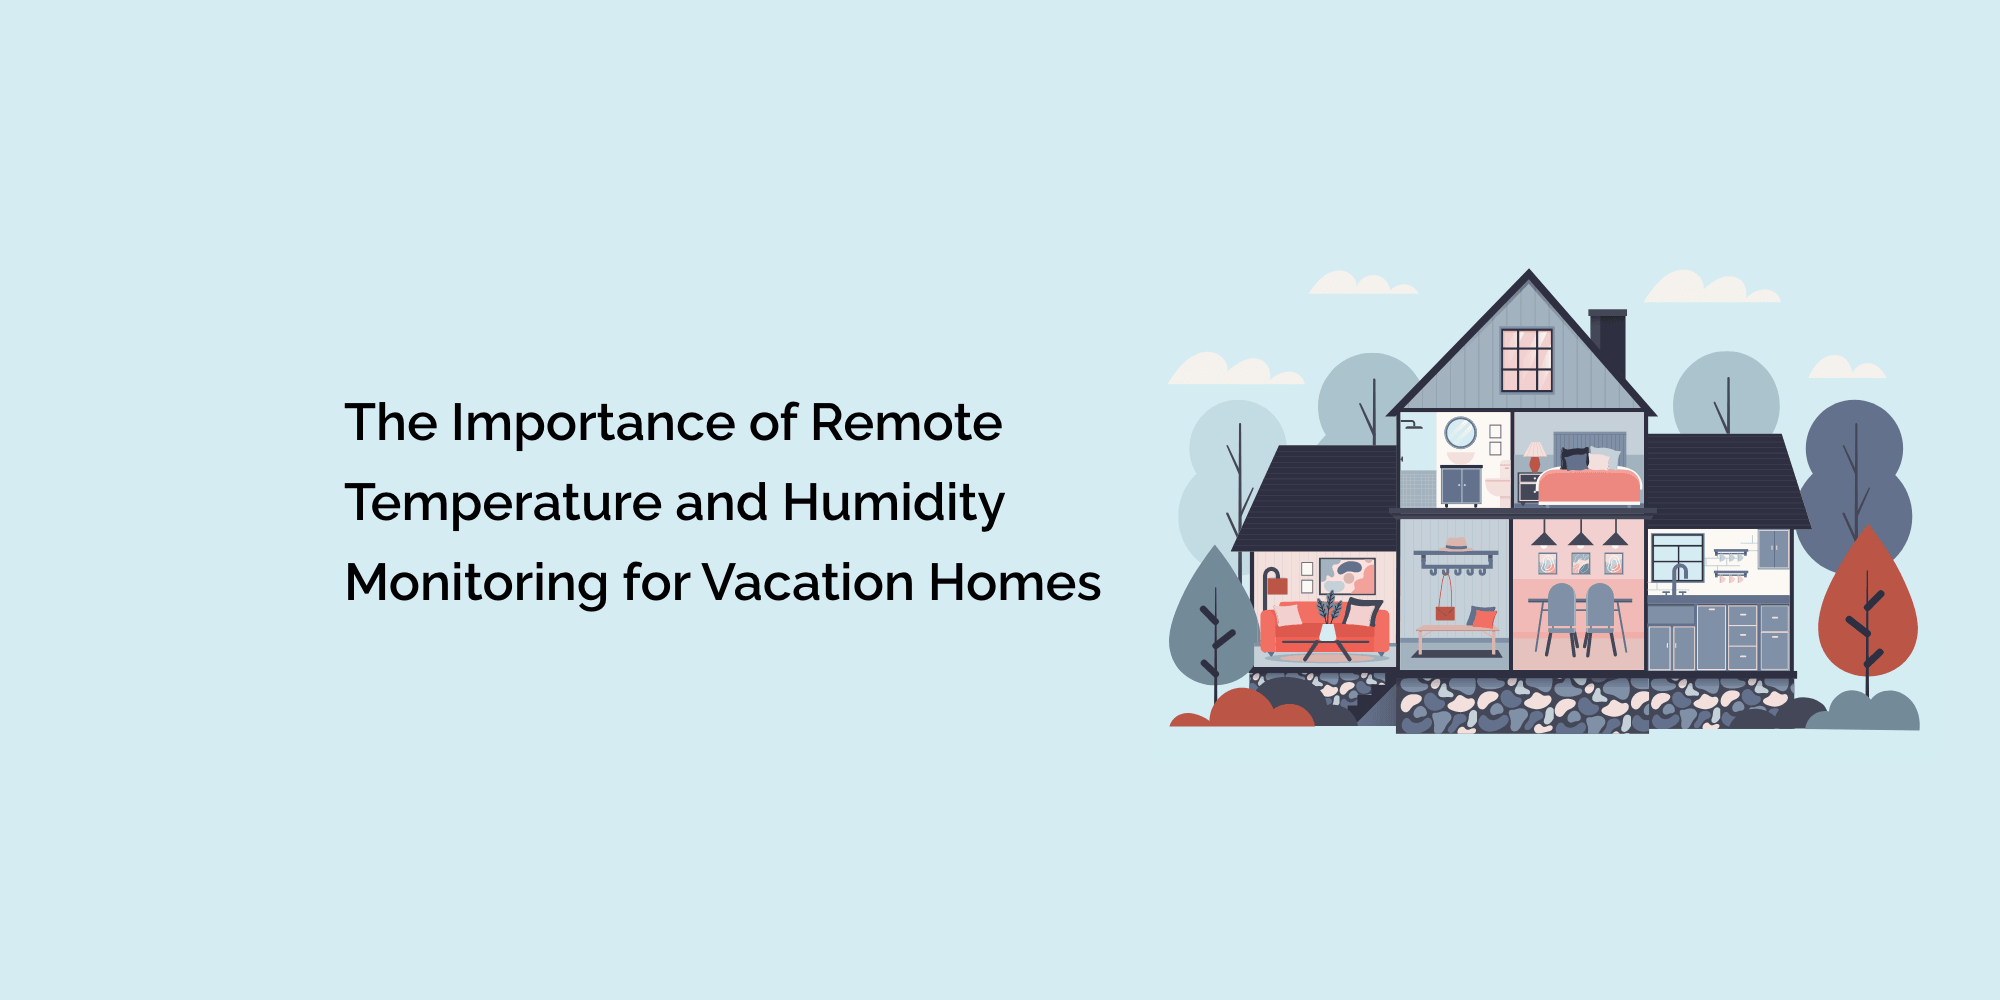 The Importance of Remote Temperature and Humidity Monitoring for Vacation Homes